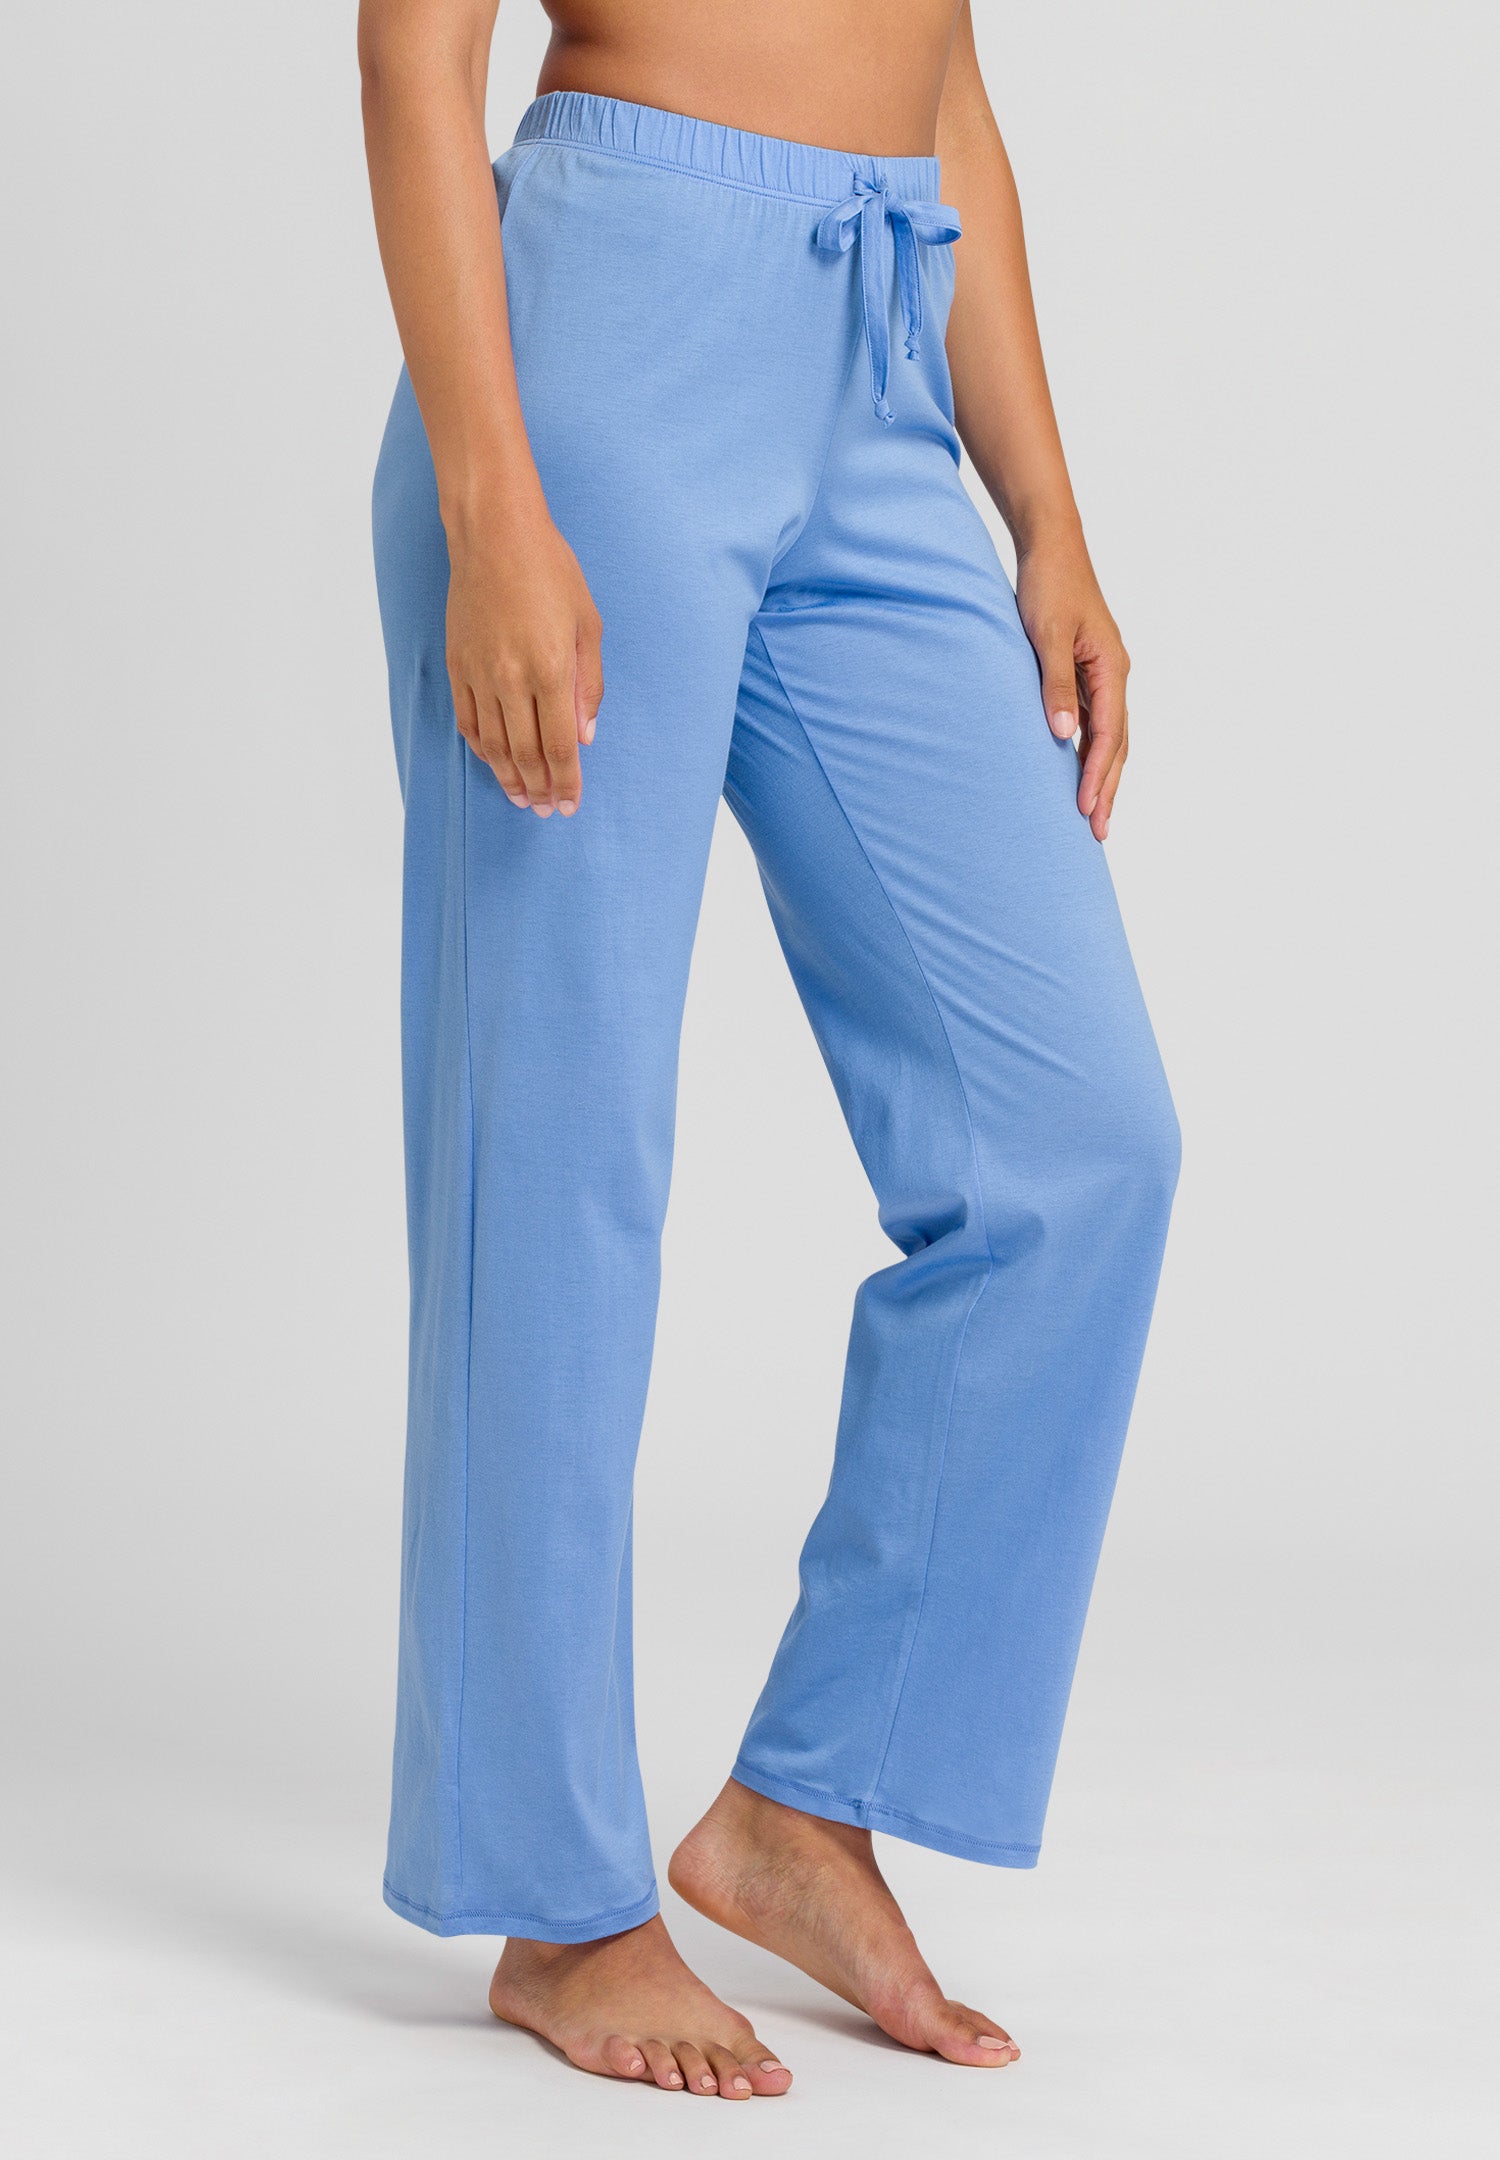 77955 Cotton Deluxe Drawstring Long Pant - 2596 Azurine